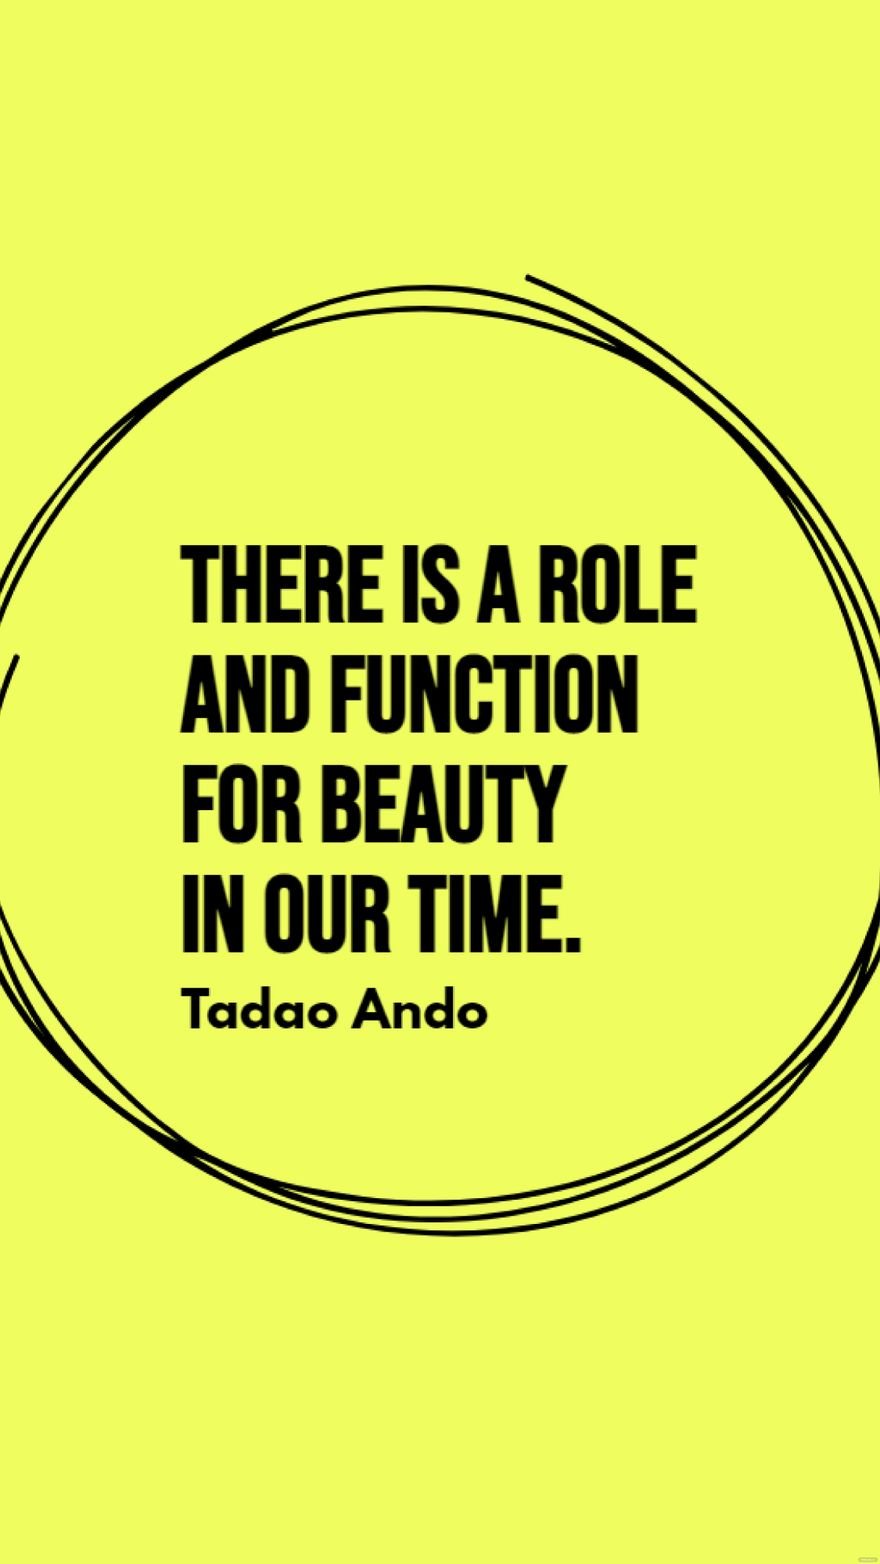 Tadao Ando - There is a role and function for beauty in our time. in JPG